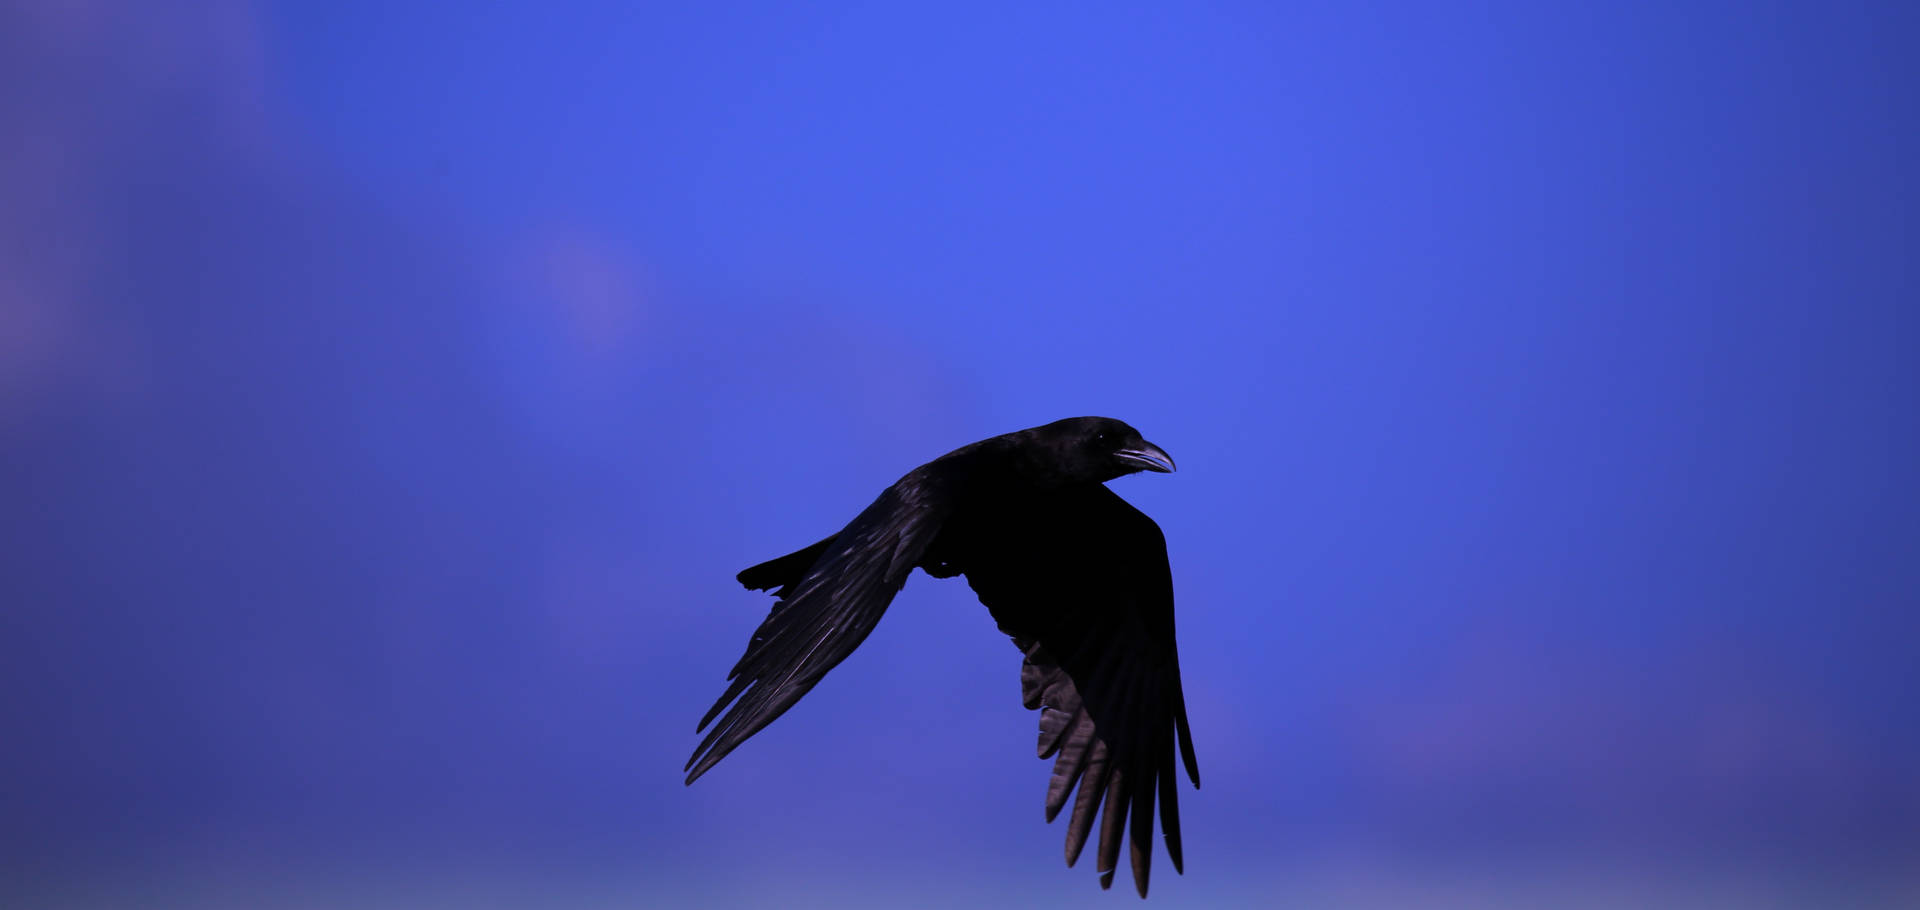 Raven 5472X2593 Wallpaper and Background Image